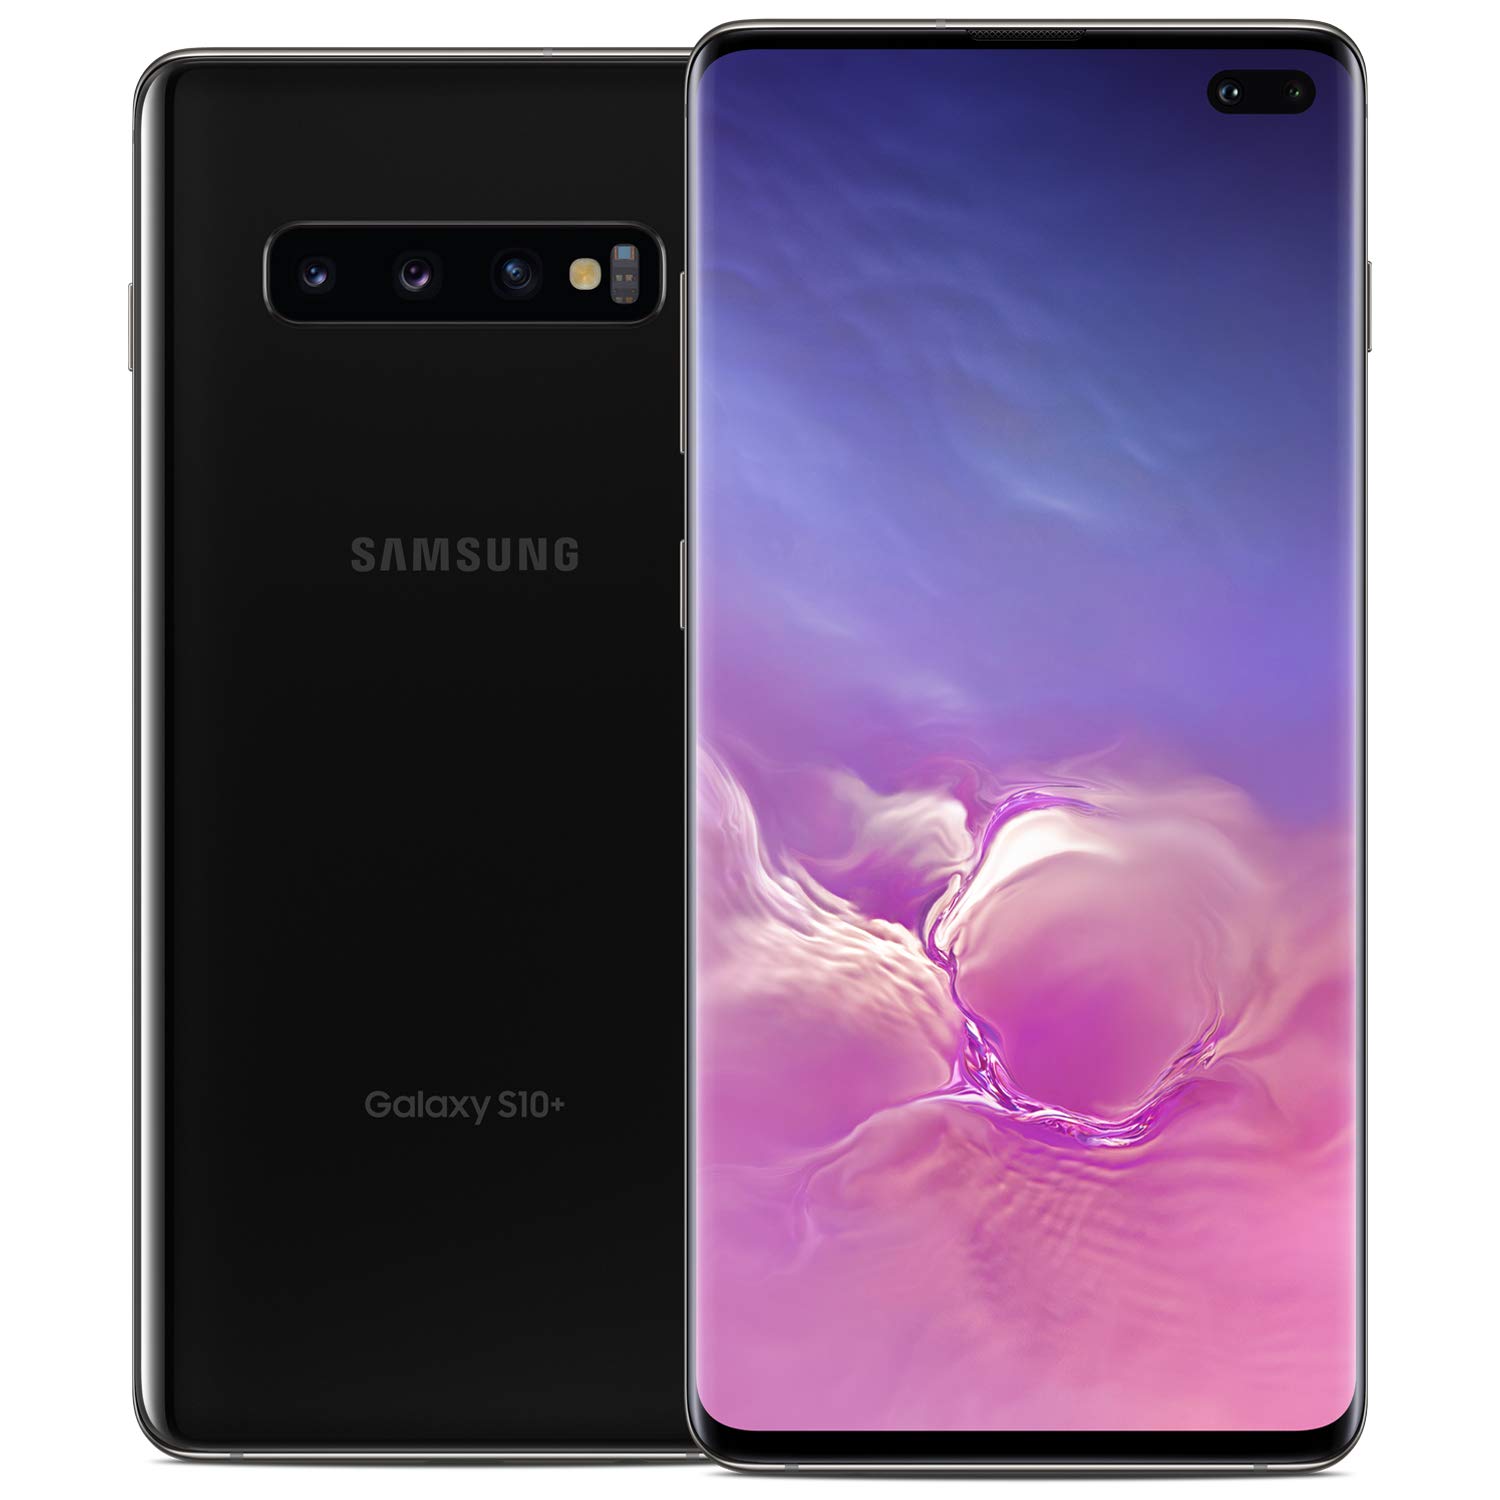 Samsung Galaxy S10+ Factory Unlocked Android Cell Phone | US Version | 128GB of Storage | Fingerprint ID and Facial Recognition | Long-Lasting Battery | U.S. Warranty | Prism Black